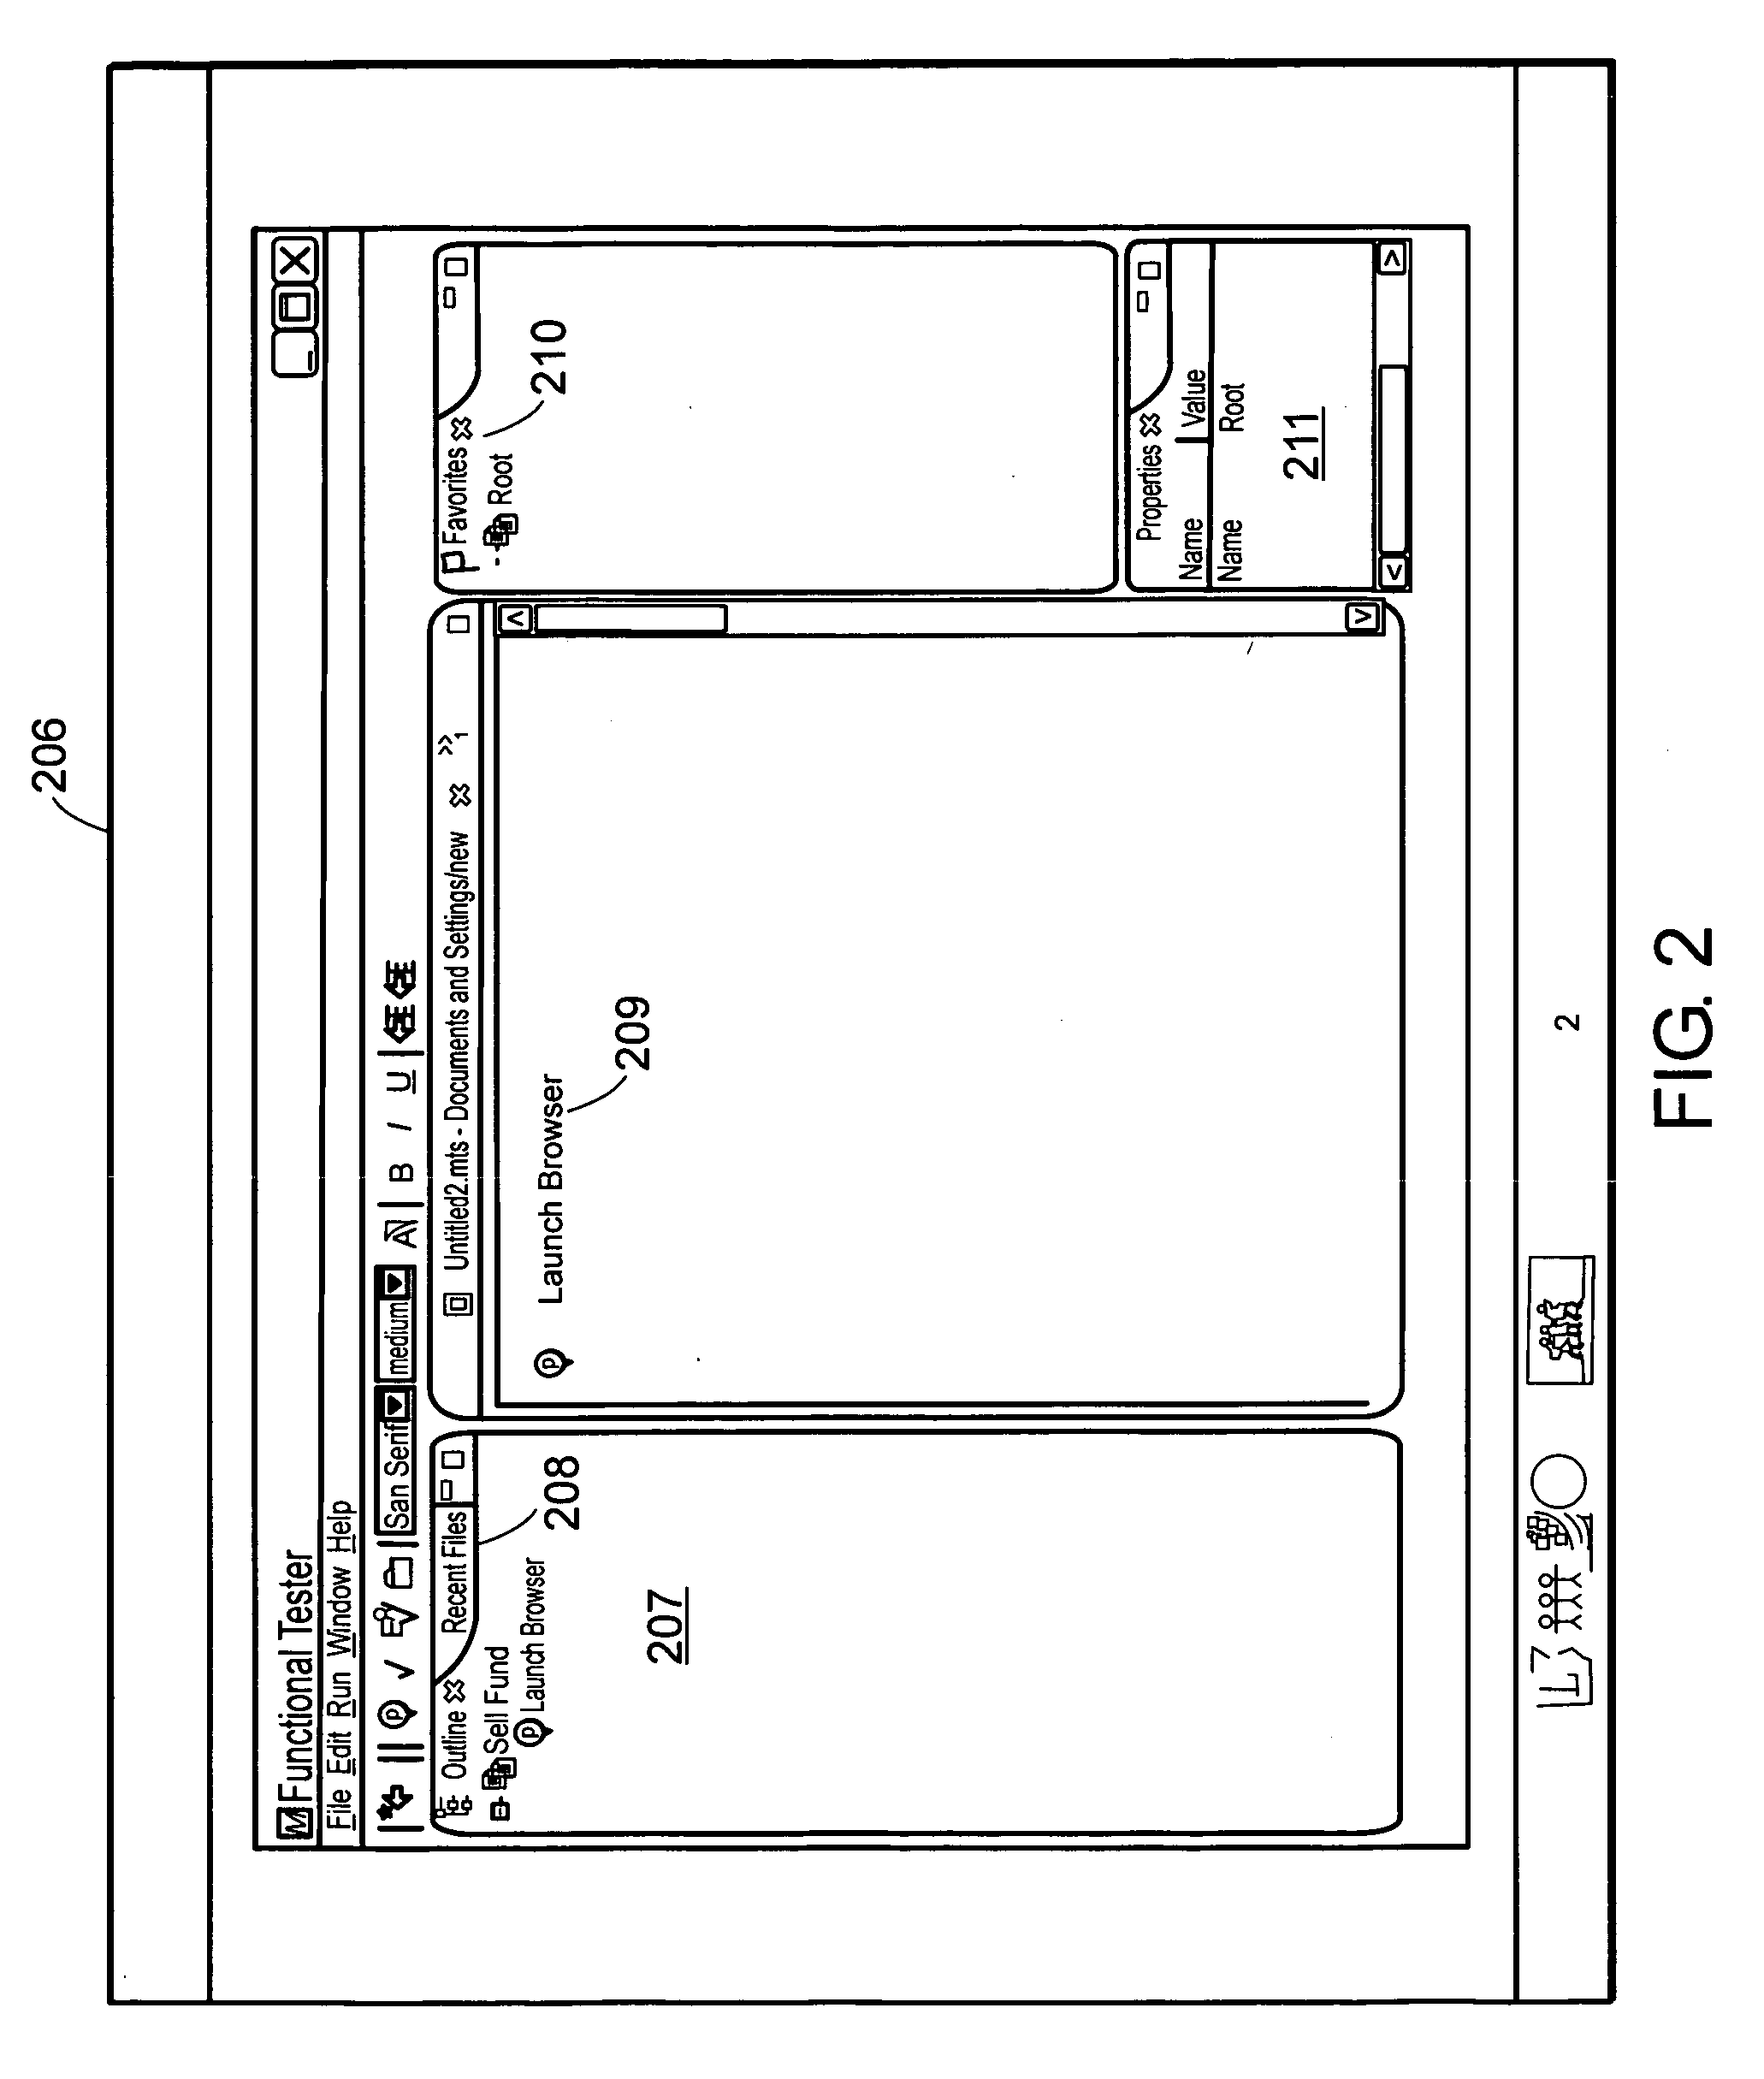 System and method for software product test modularization